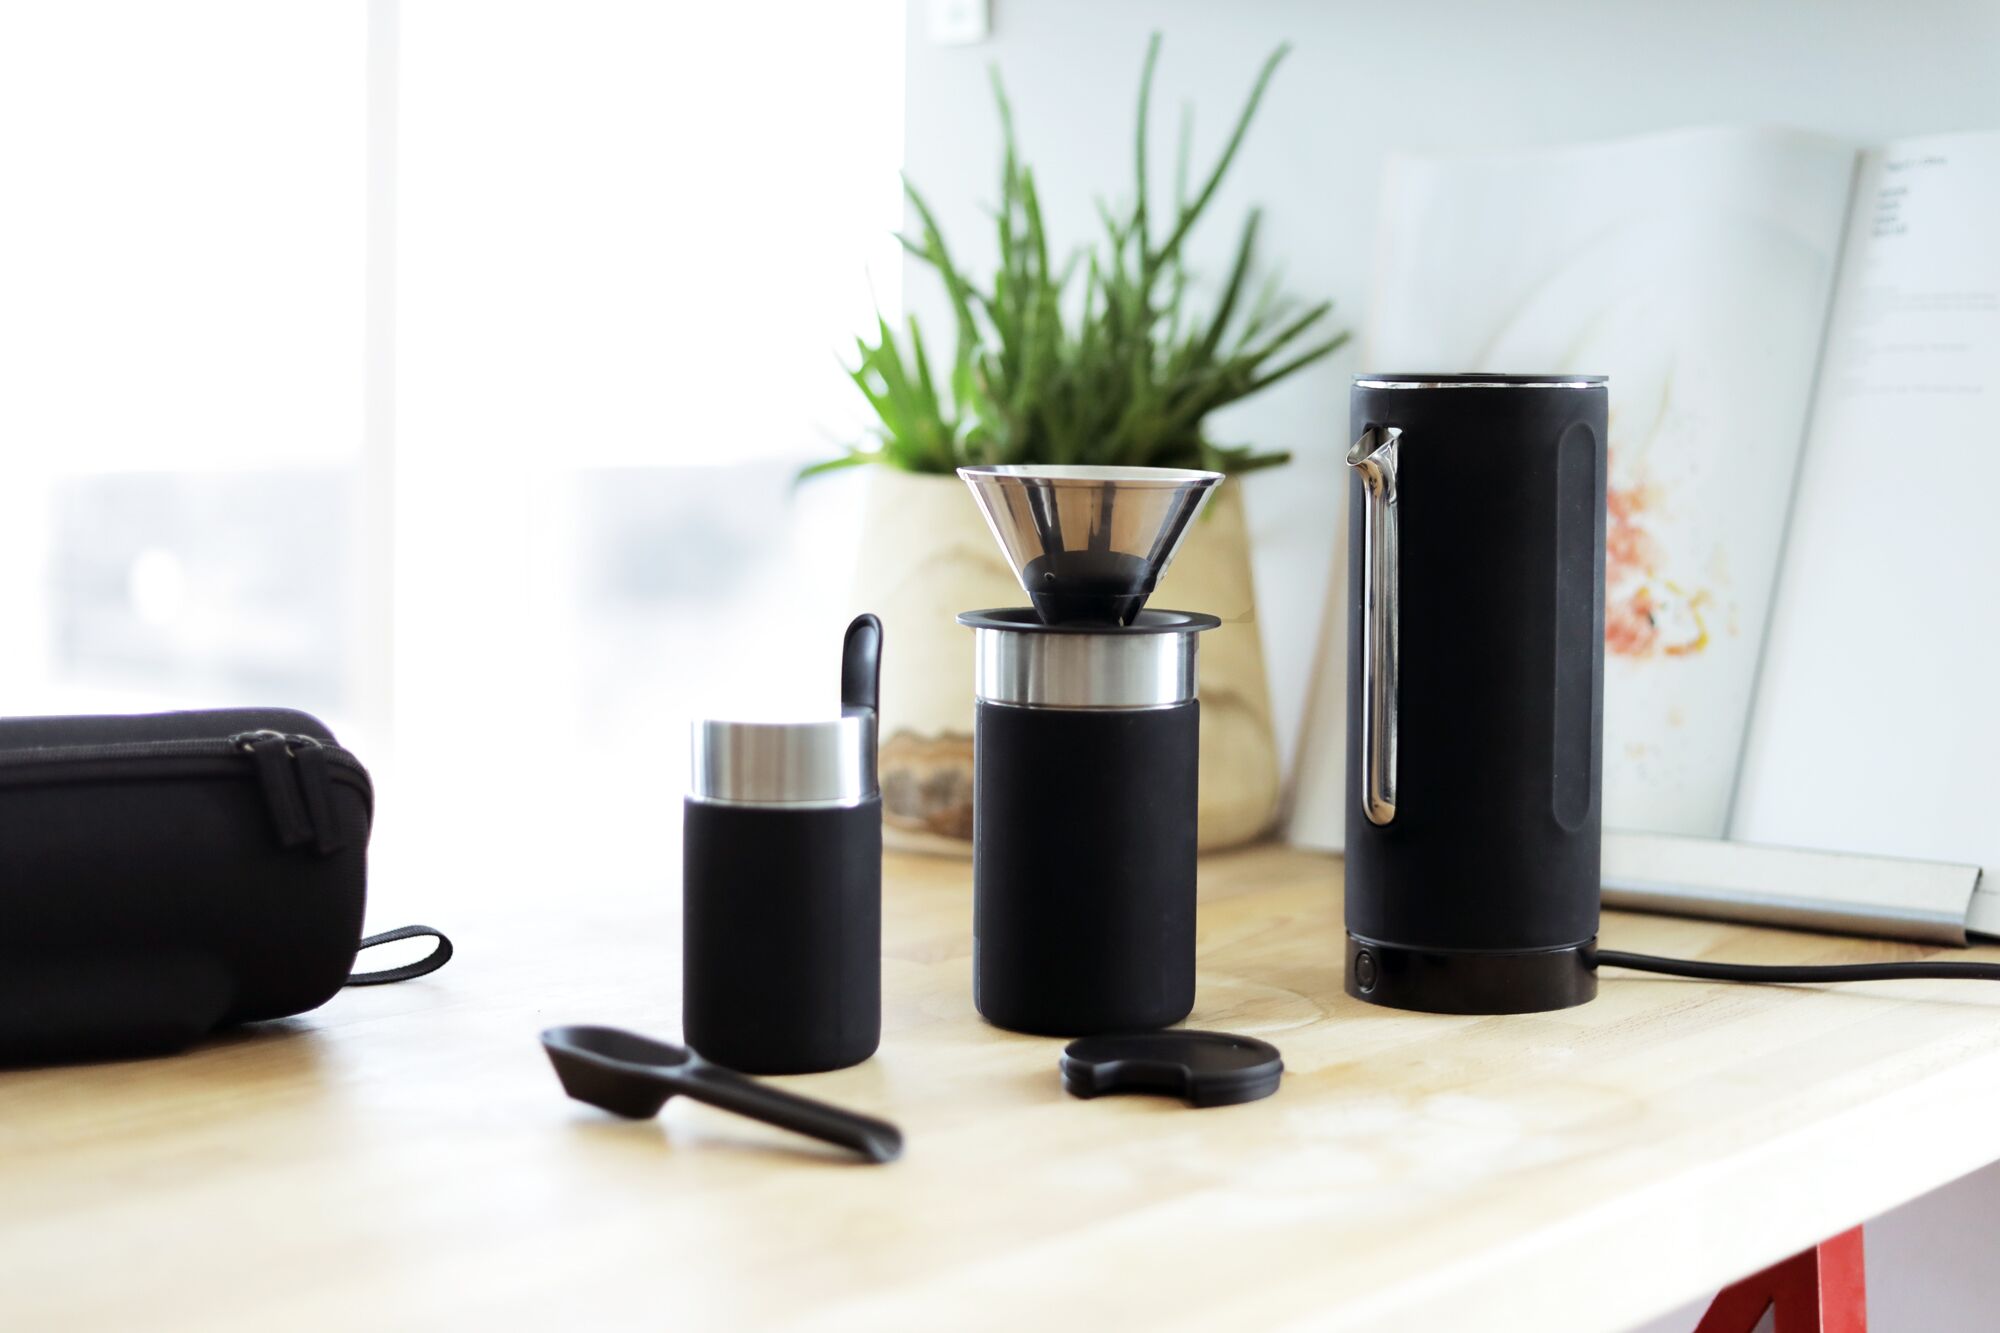 The Pakt Coffee Kit is a brewing system for the road - The Gadgeteer